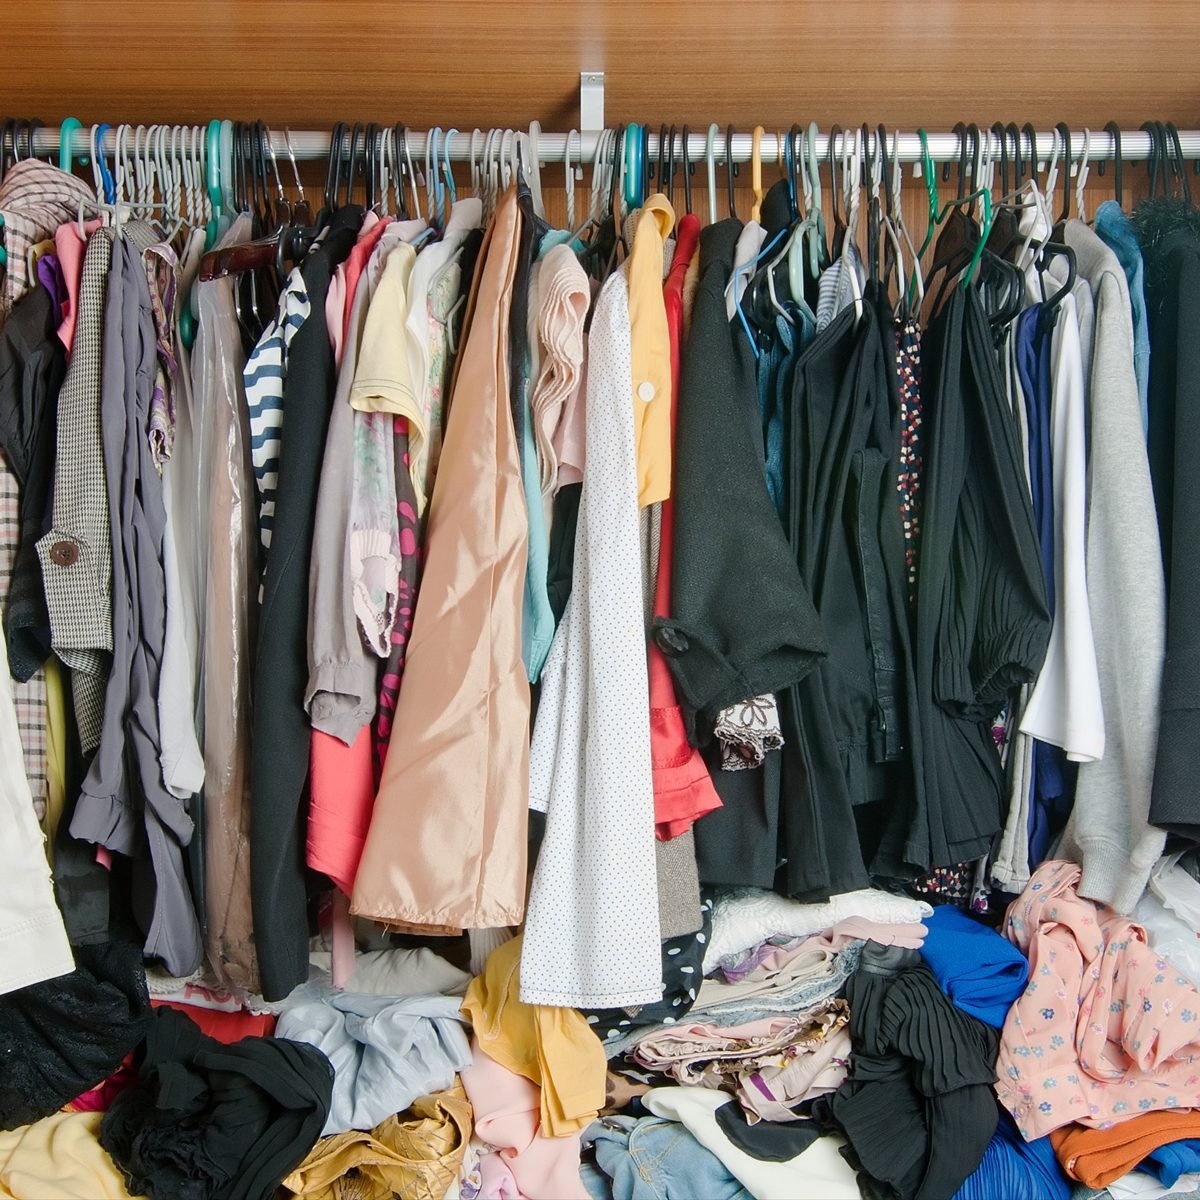 How to Declutter a Closet in 4 Steps | Family Handyman